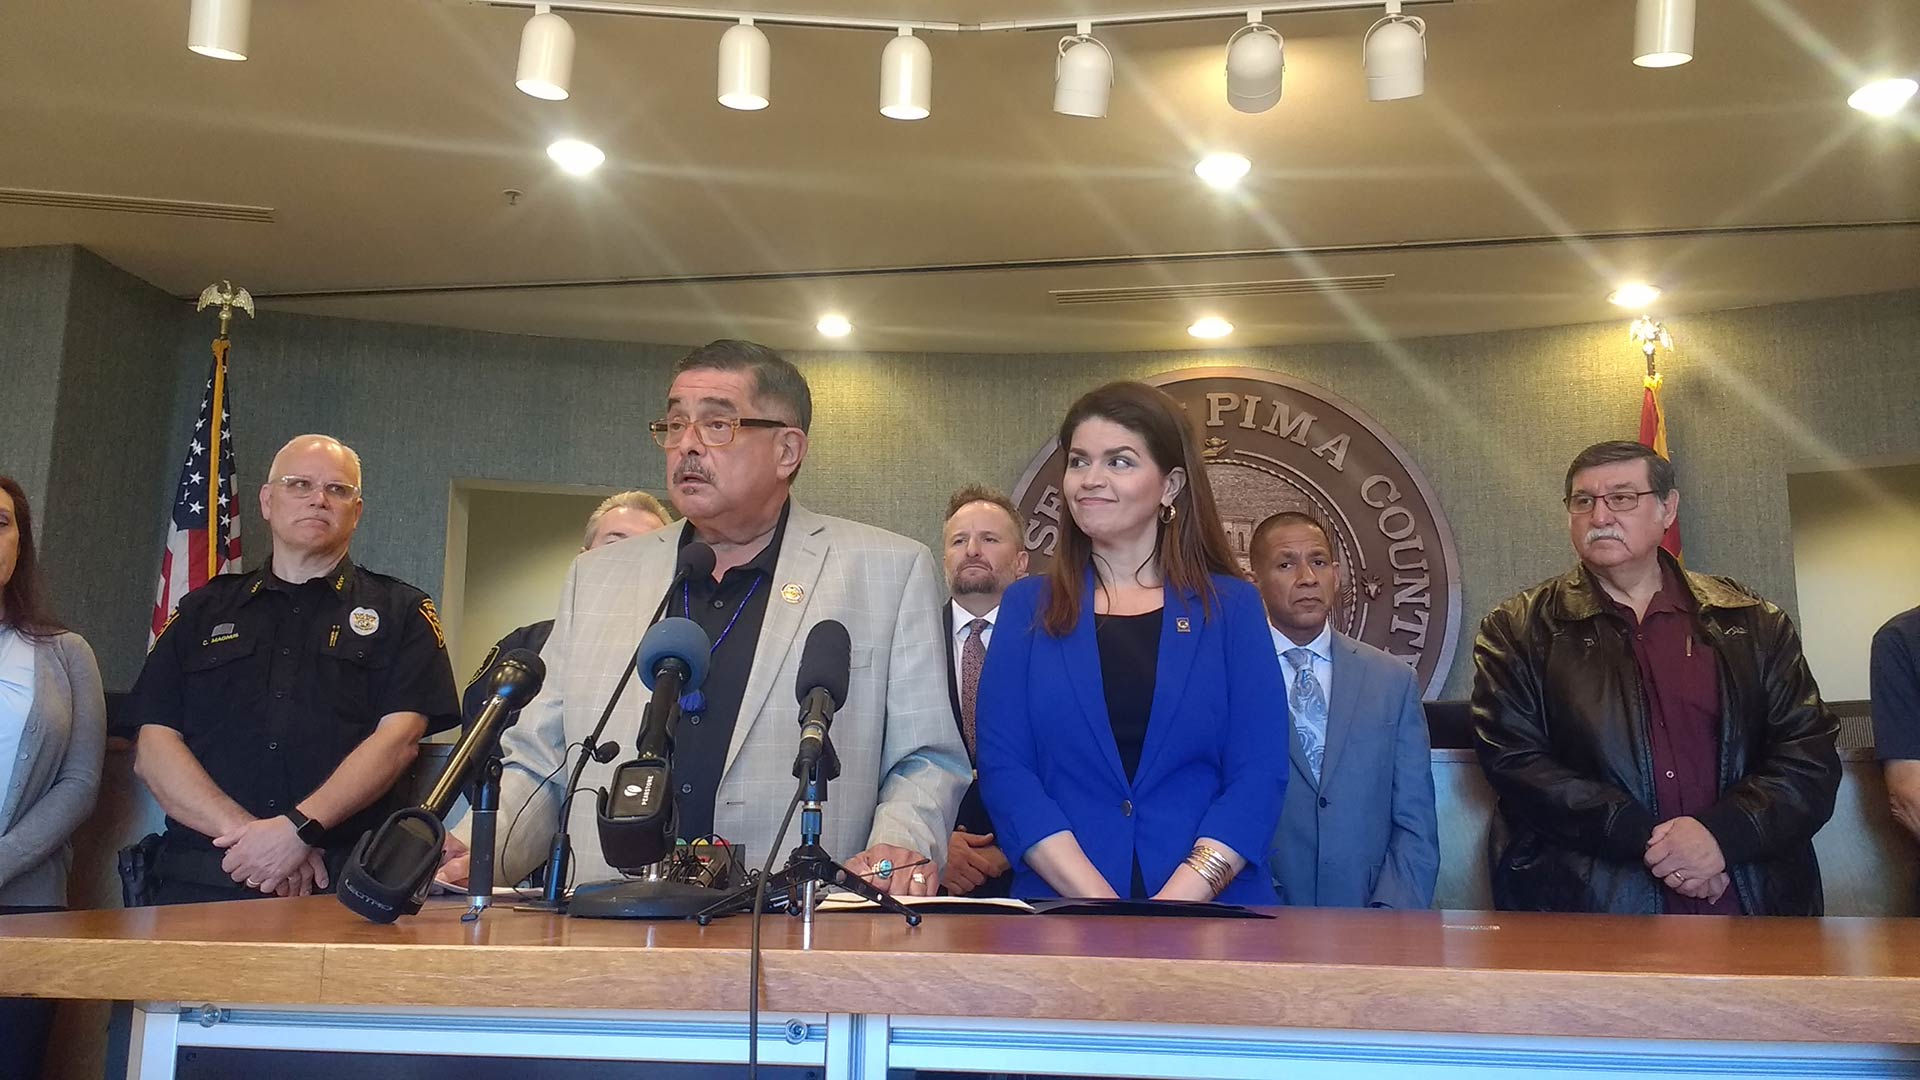 Surrounded by city and county officials, Pima County Supervisors Chairman Richard Elías and Tucson Mayor Regina Romero speak to reporters at a March 9, 2020 news conference about the local response to the spread of the novel coronavirus, which causes COVID-19.